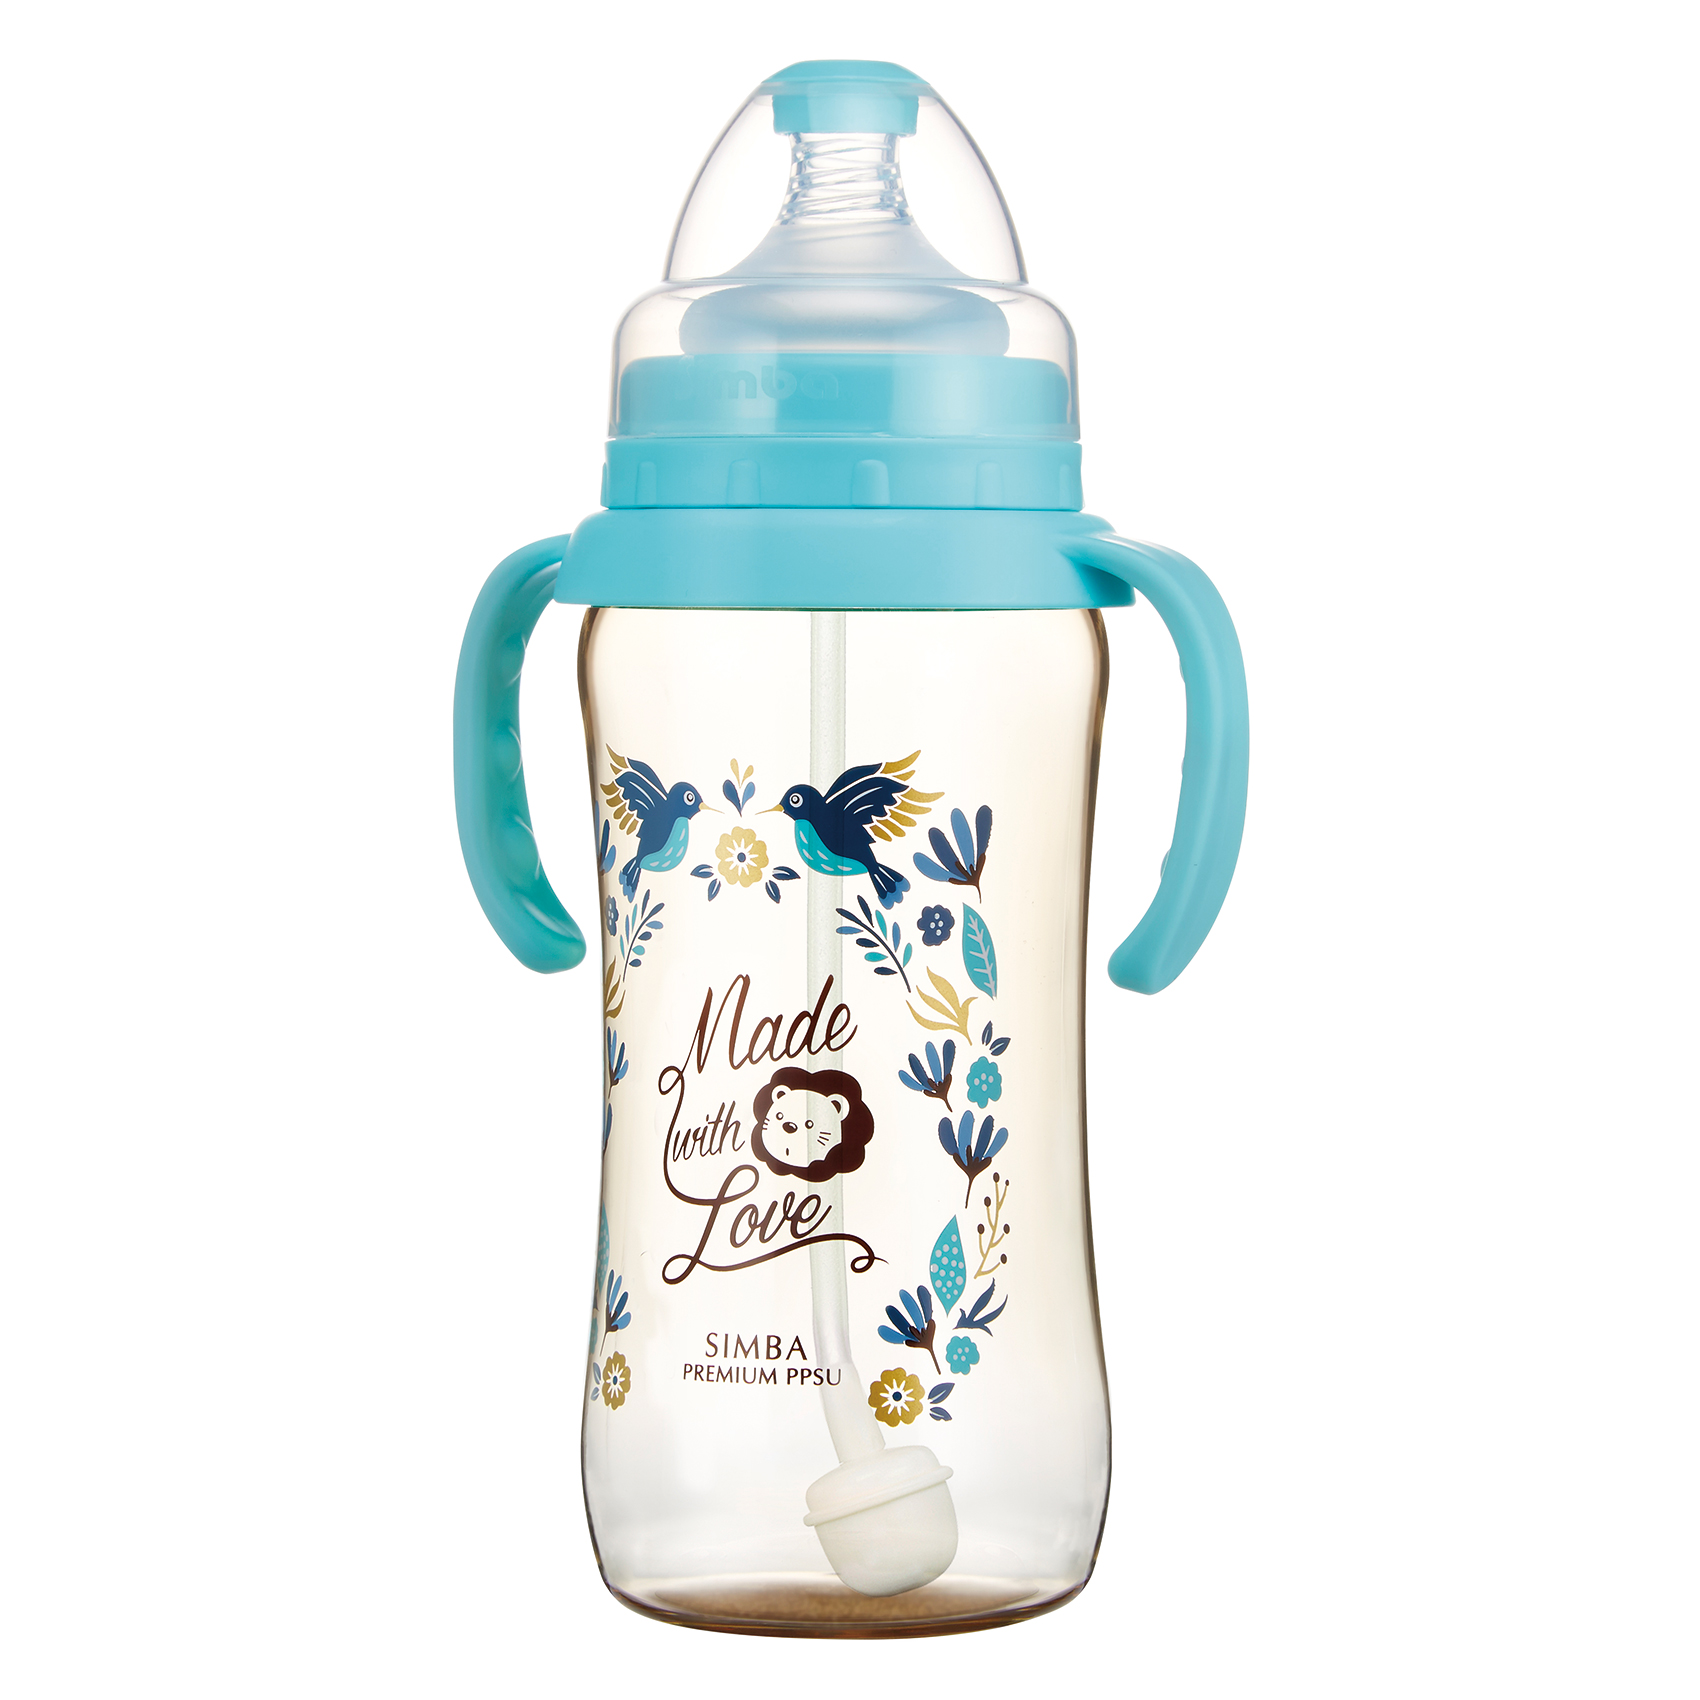 Simba Premium 12 oz PPSU Wide Neck Feeding Bottle with Handle and Weight Straw (Blue , Stage 1 Nipple)